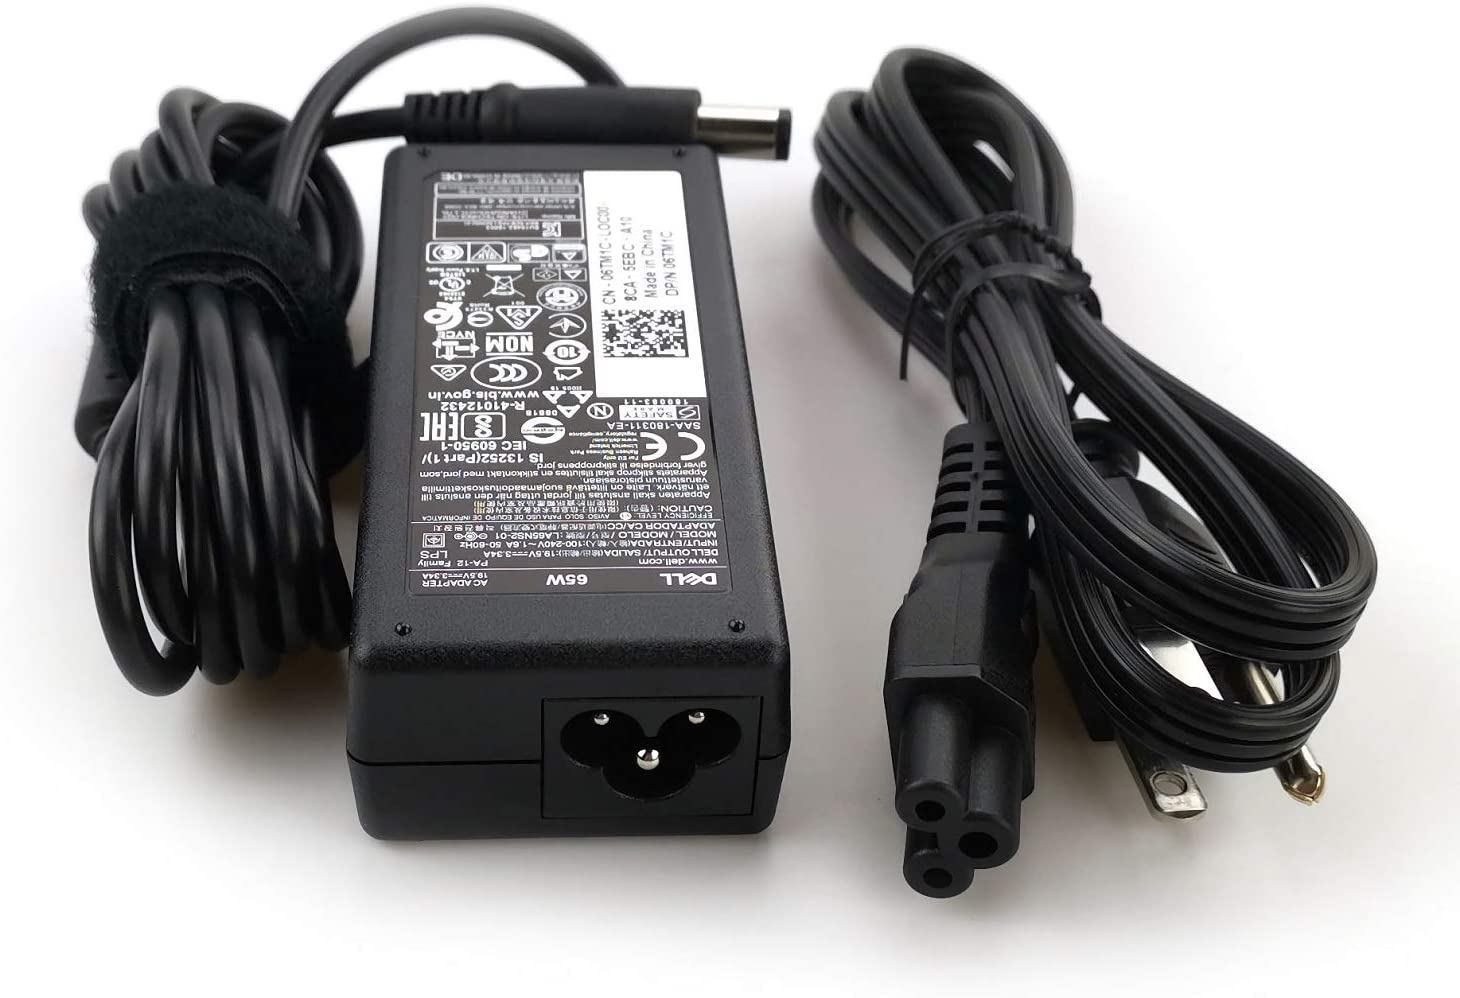 Dell 65W AC Adapter for: Dell Inspiron N311Z, Dell Inspiron N4010, Dell Inspiron N4020, Dell Inspiron N4030, Dell Inspiron N4110, Dell Inspiron N5010